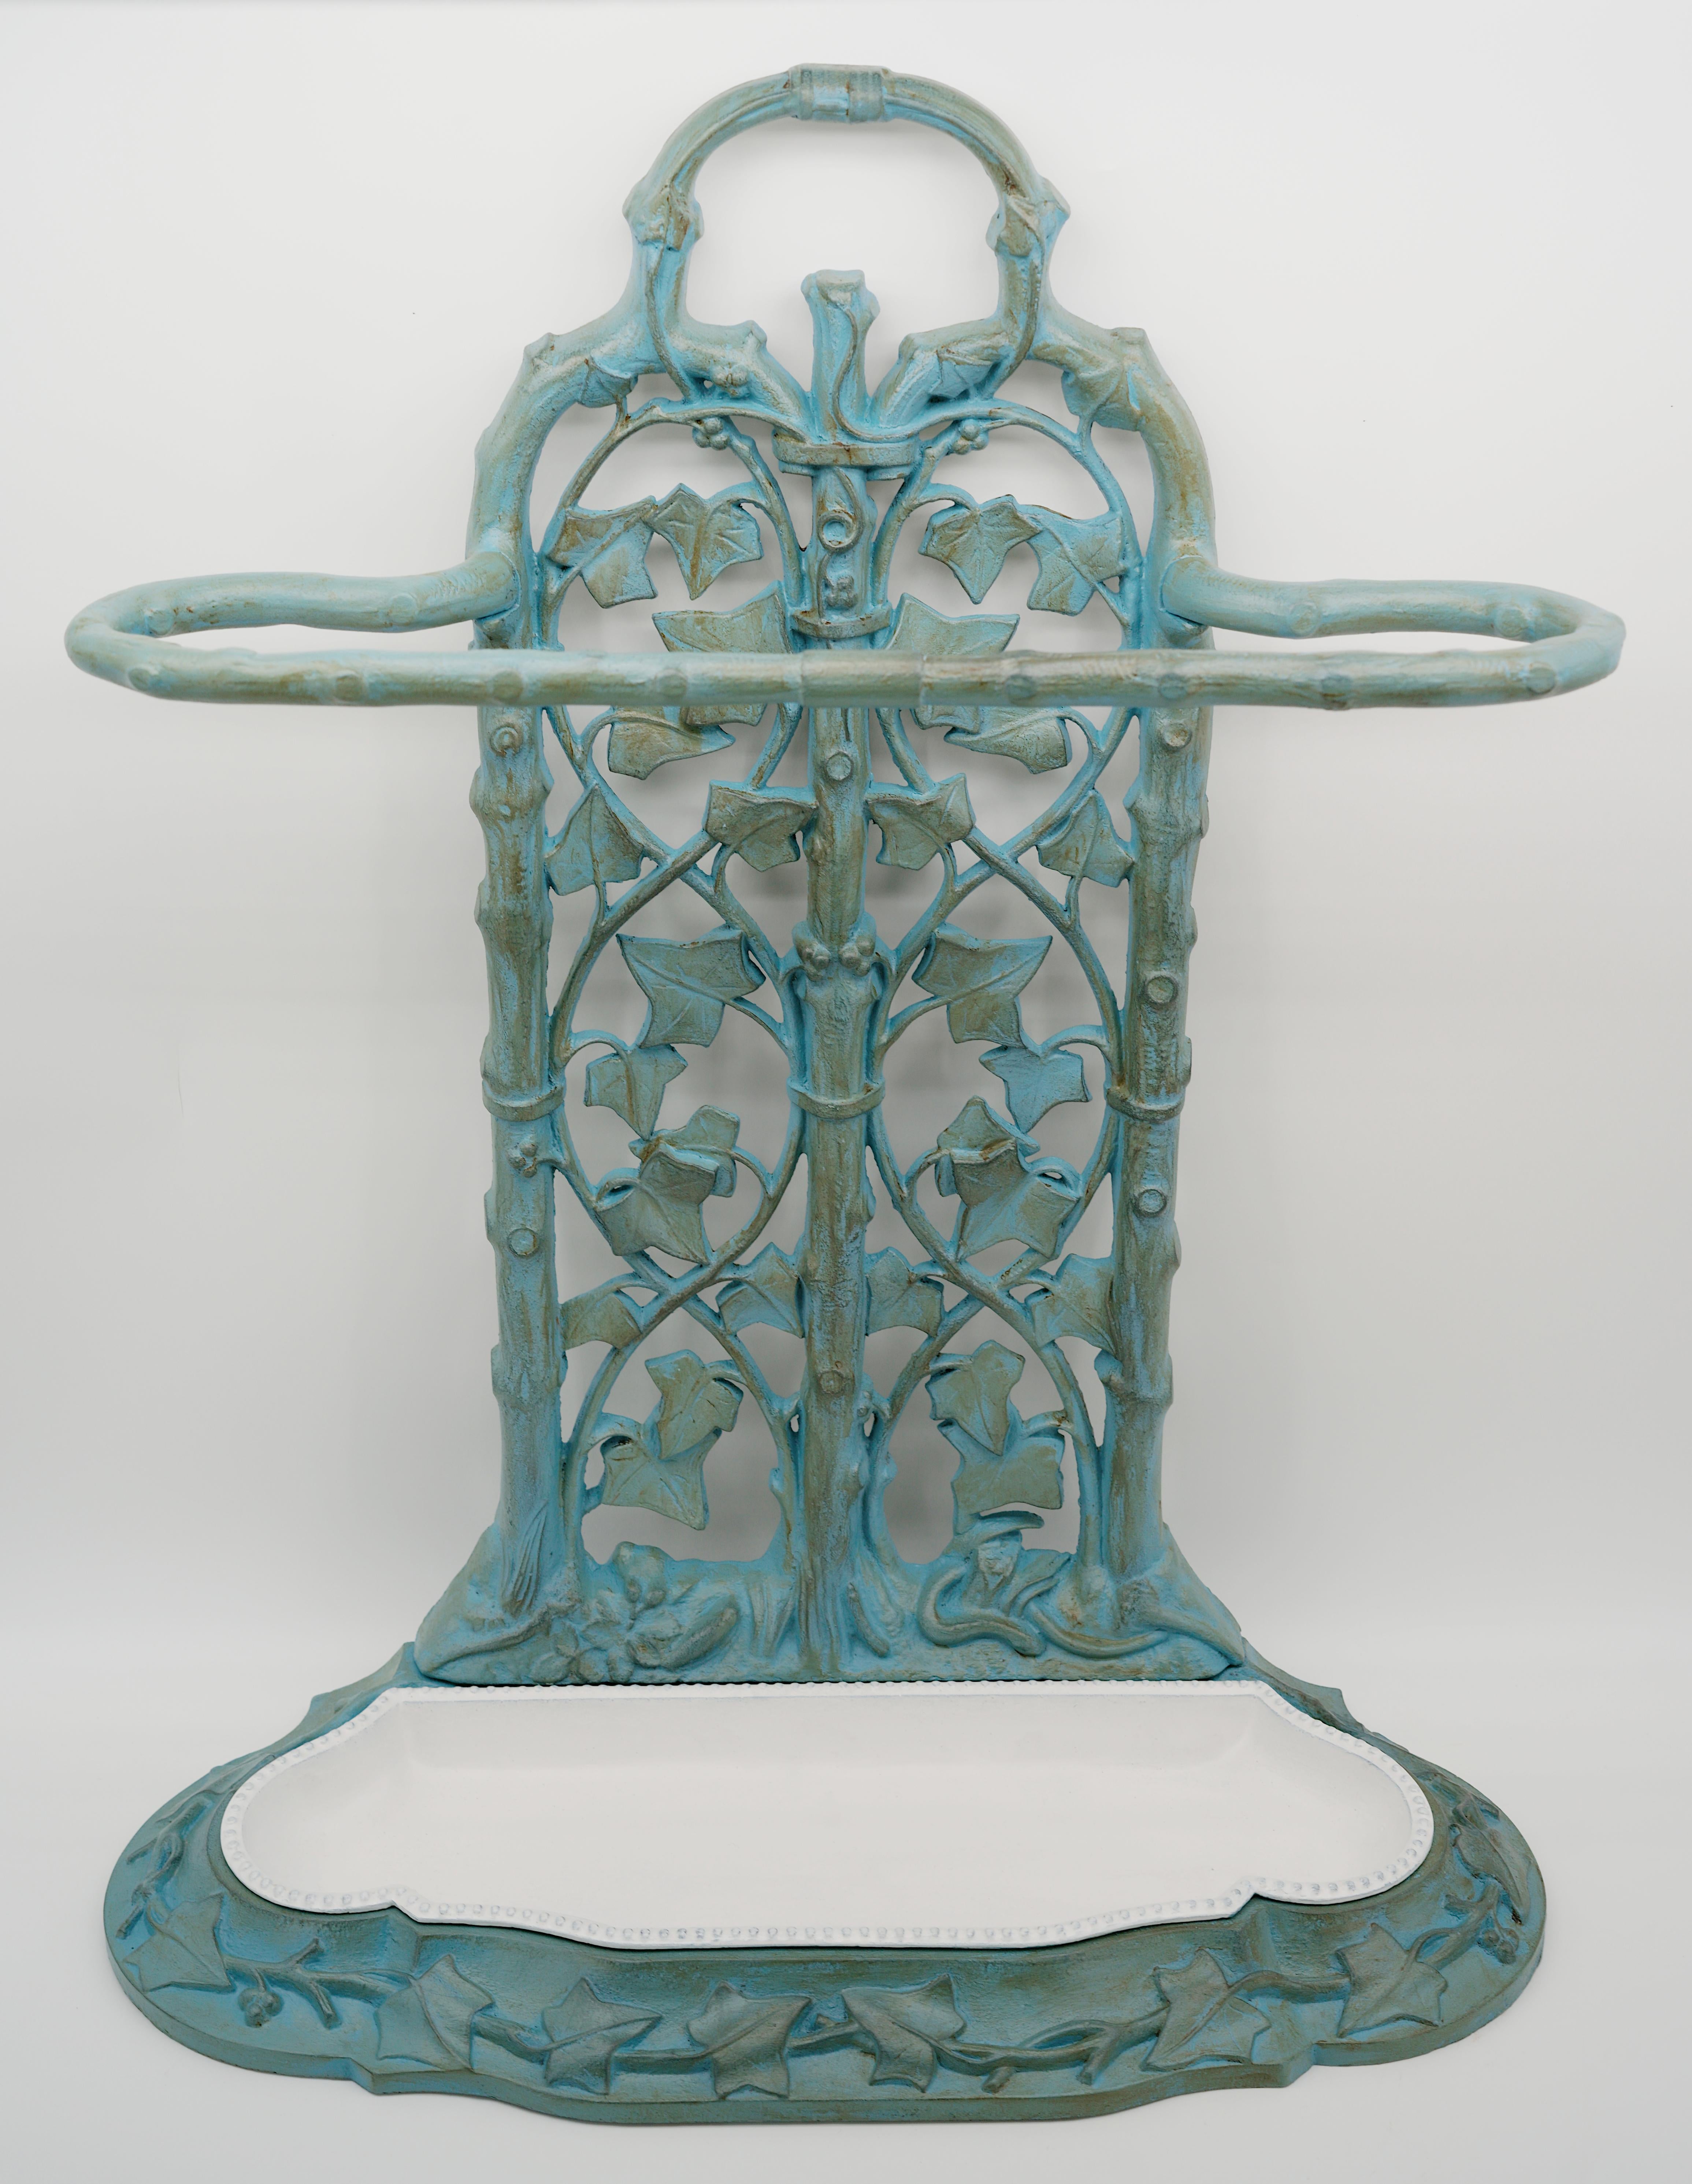 Patinated French Art Nouveau Umbrella Stand, 1900 For Sale